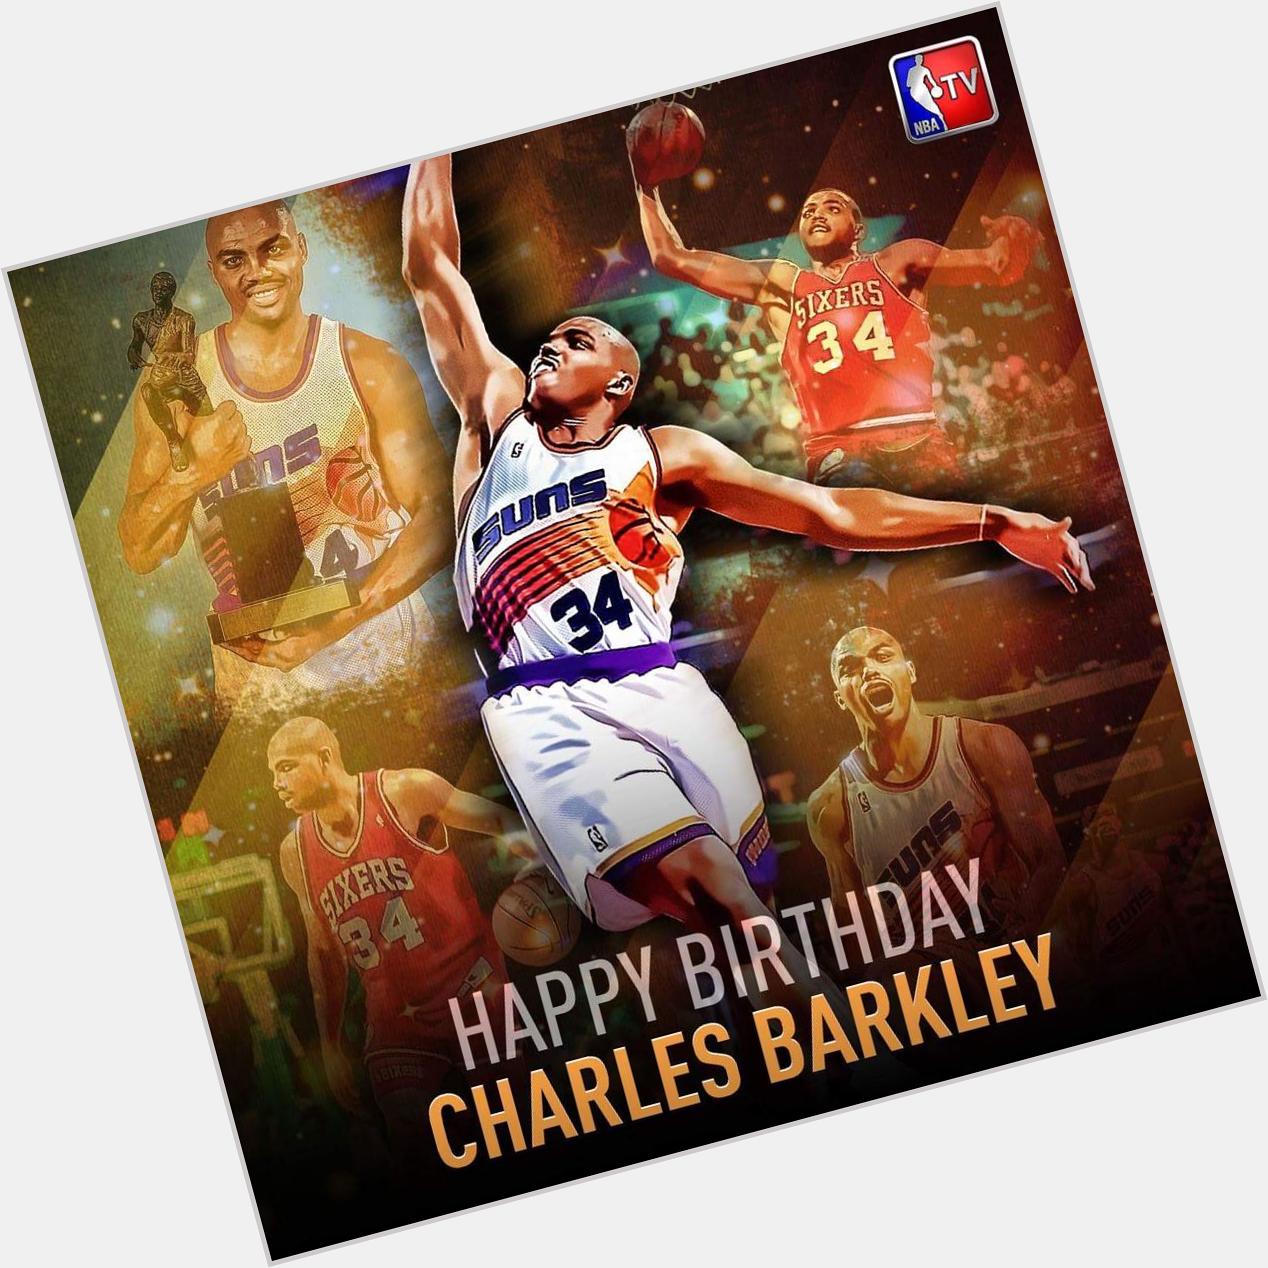 Happy Birthday To Sir Charles Barkley 
Member of the Original Dream team
 
One of the greatest player to ever play.. 